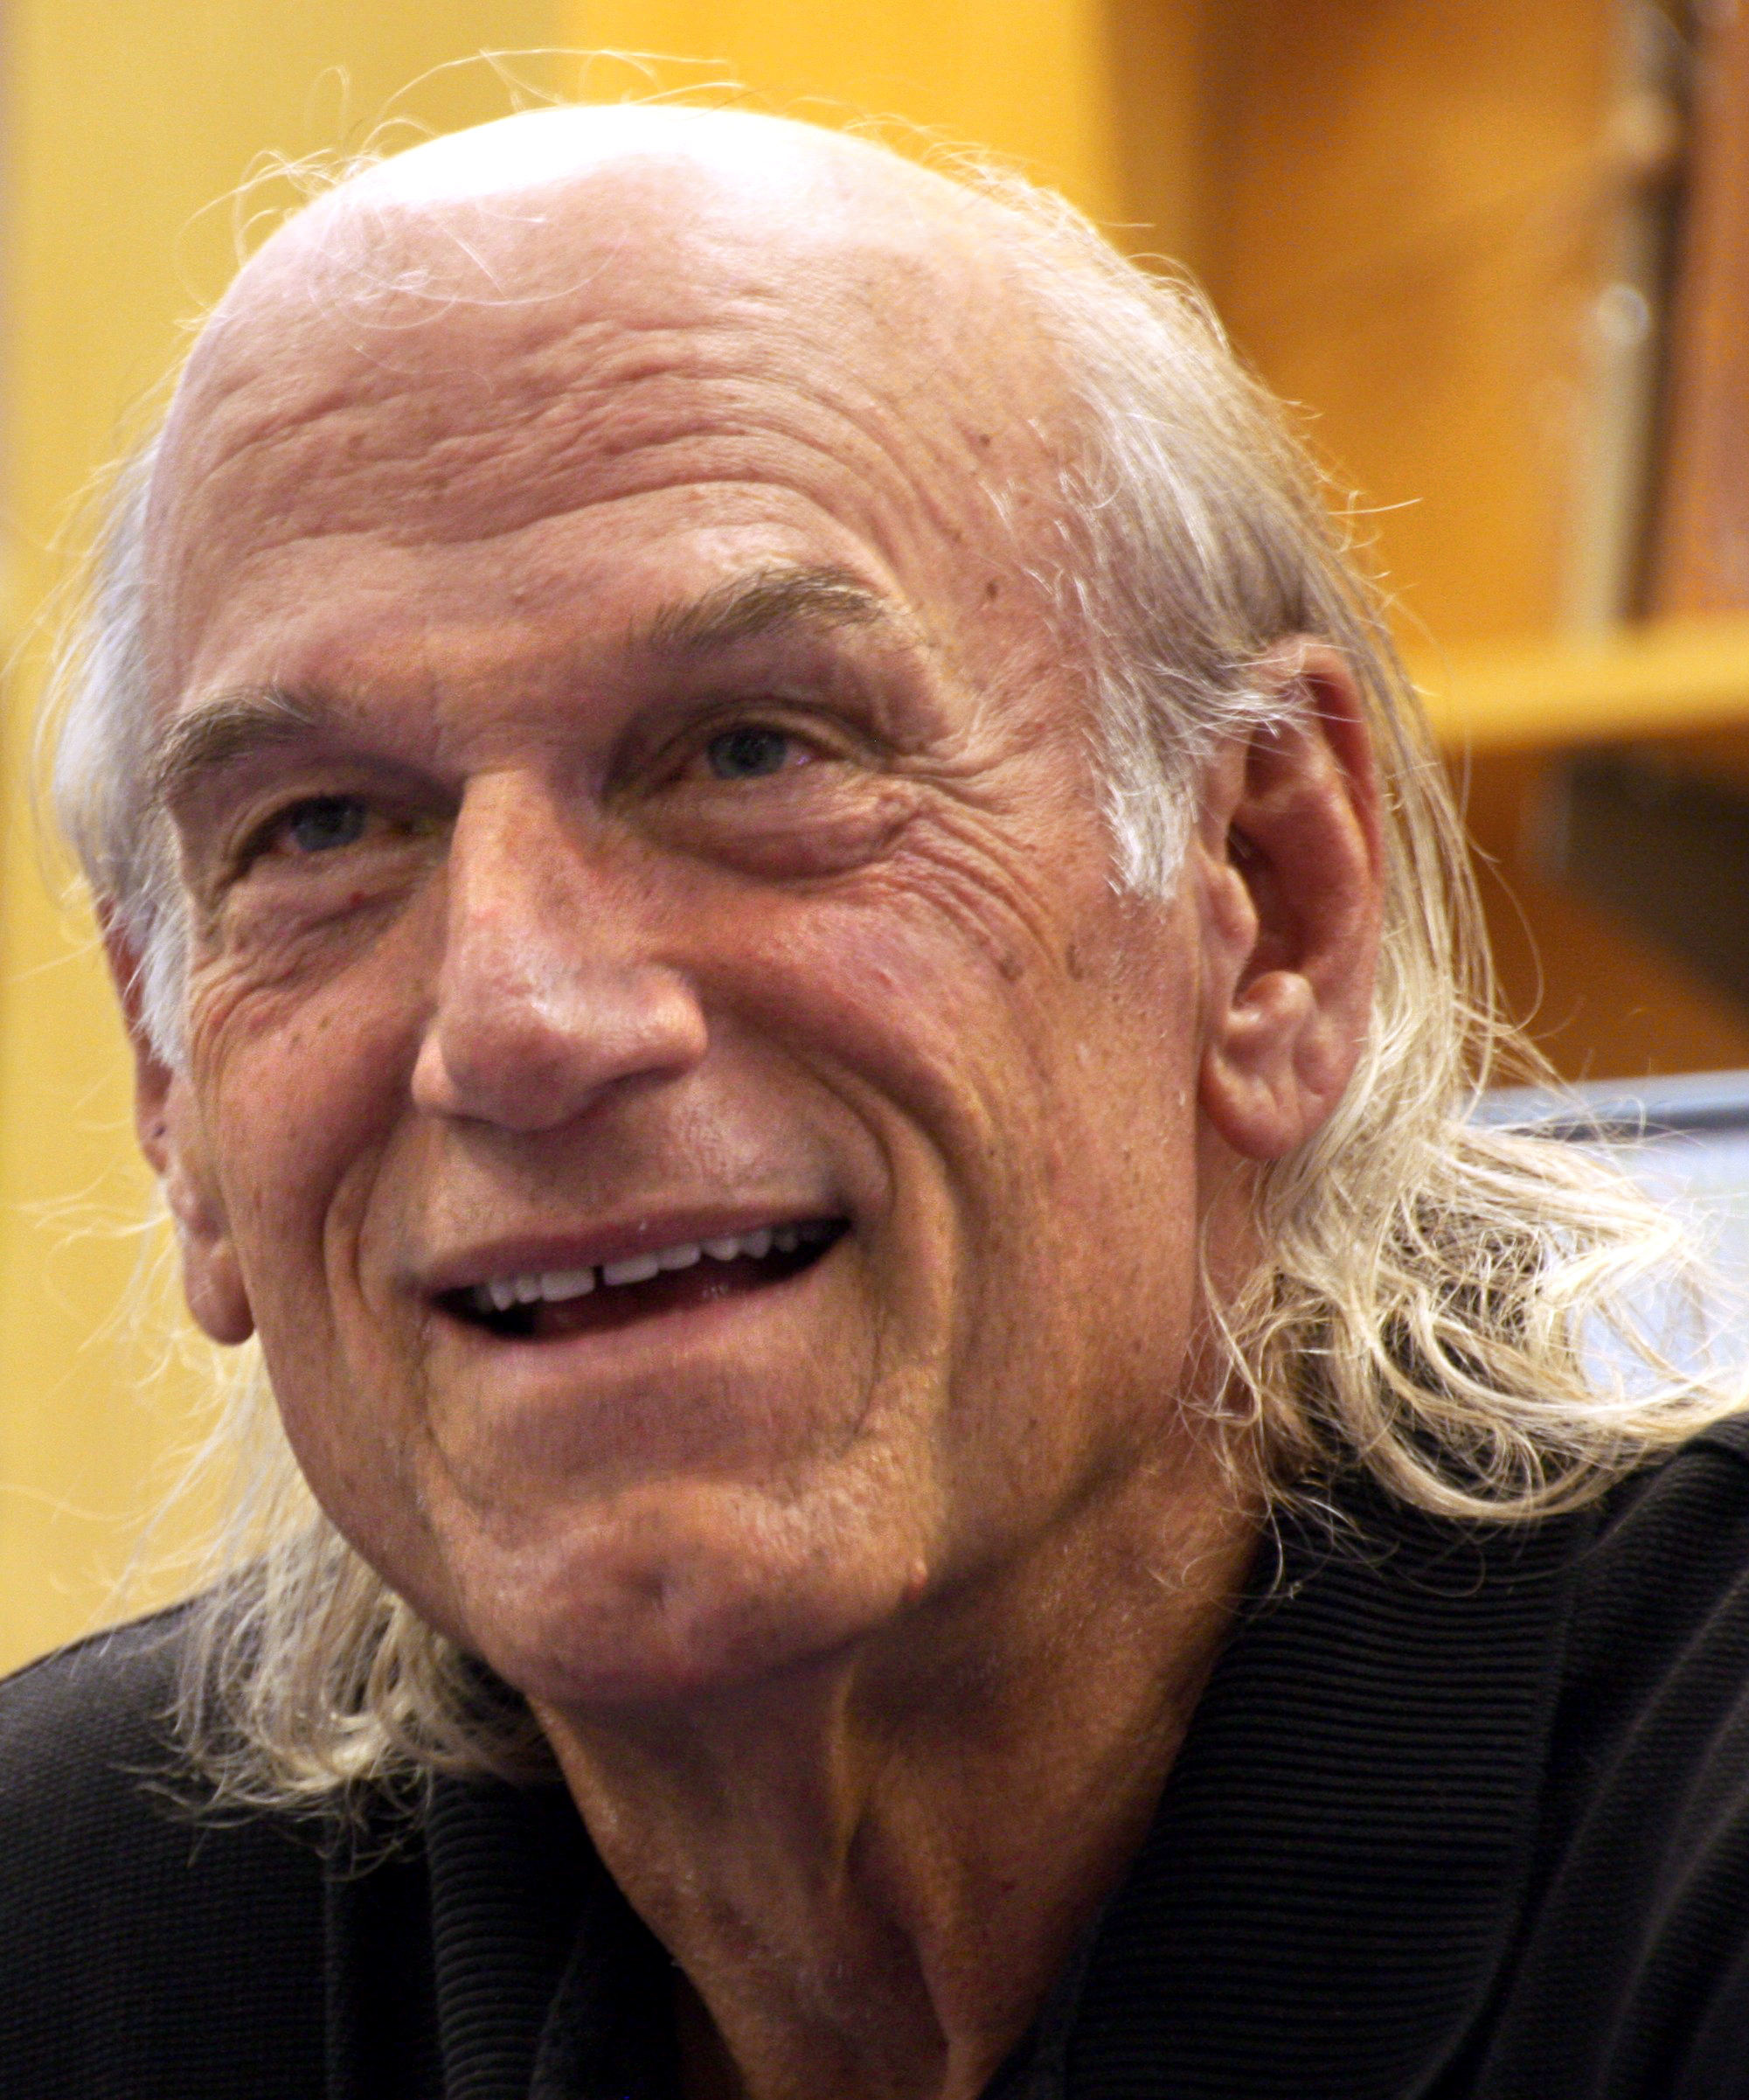 The 72-year old son of father (?) and mother(?) Jesse Ventura in 2023 photo. Jesse Ventura earned a  million dollar salary - leaving the net worth at  million in 2023